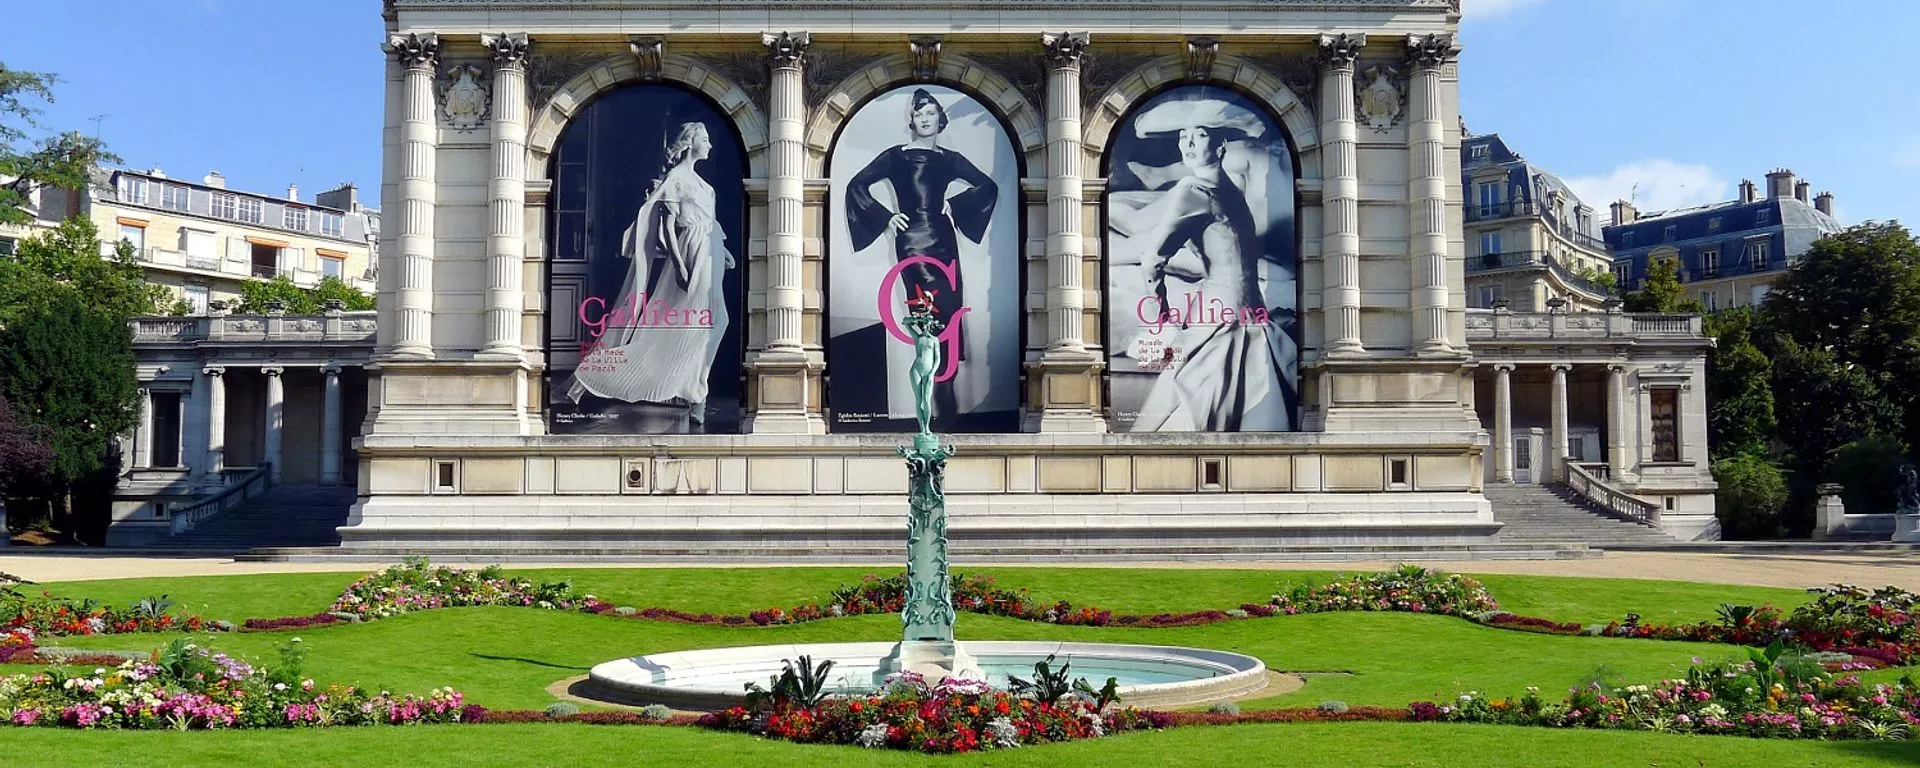 Palais Galliera, The City of Paris Fashion Museum in France, Europe | Museums - Rated 4